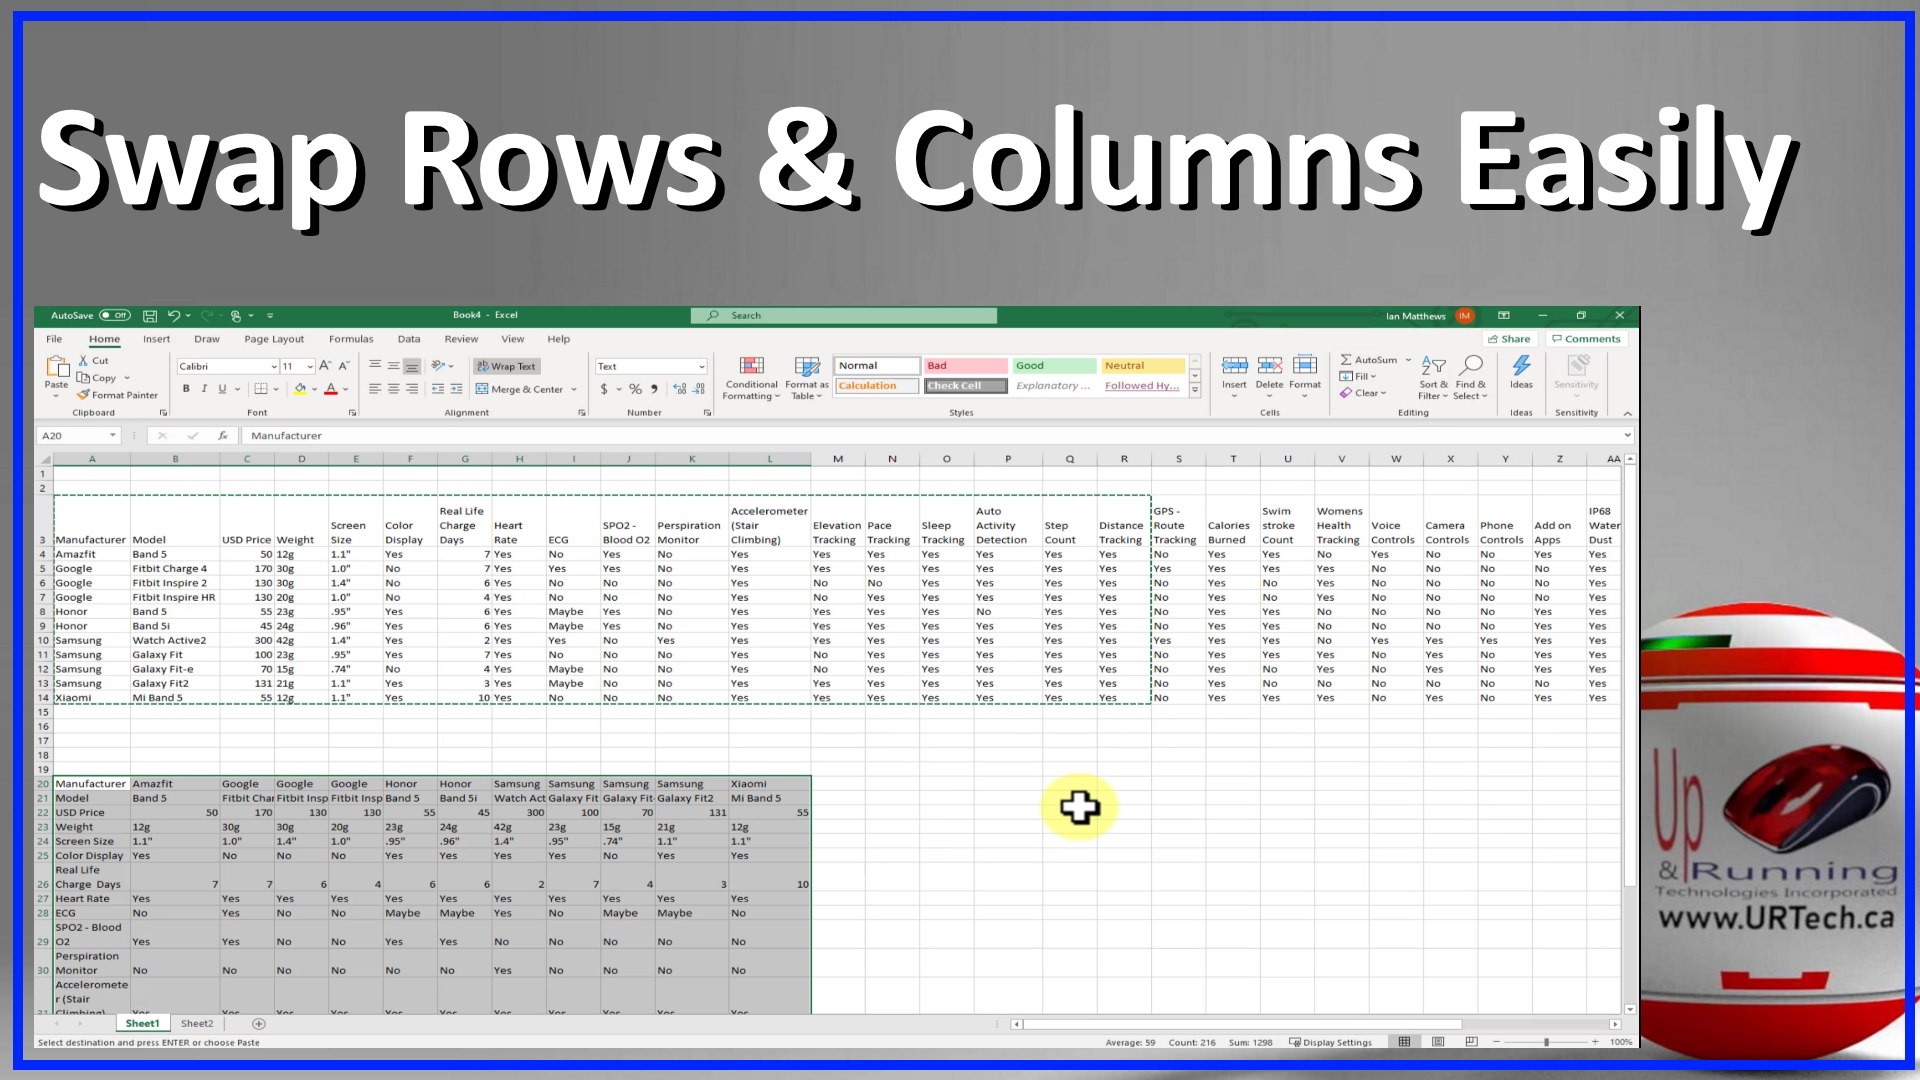 SOLVED: VIDEO: Easily Swap Rows & Columns in Excel